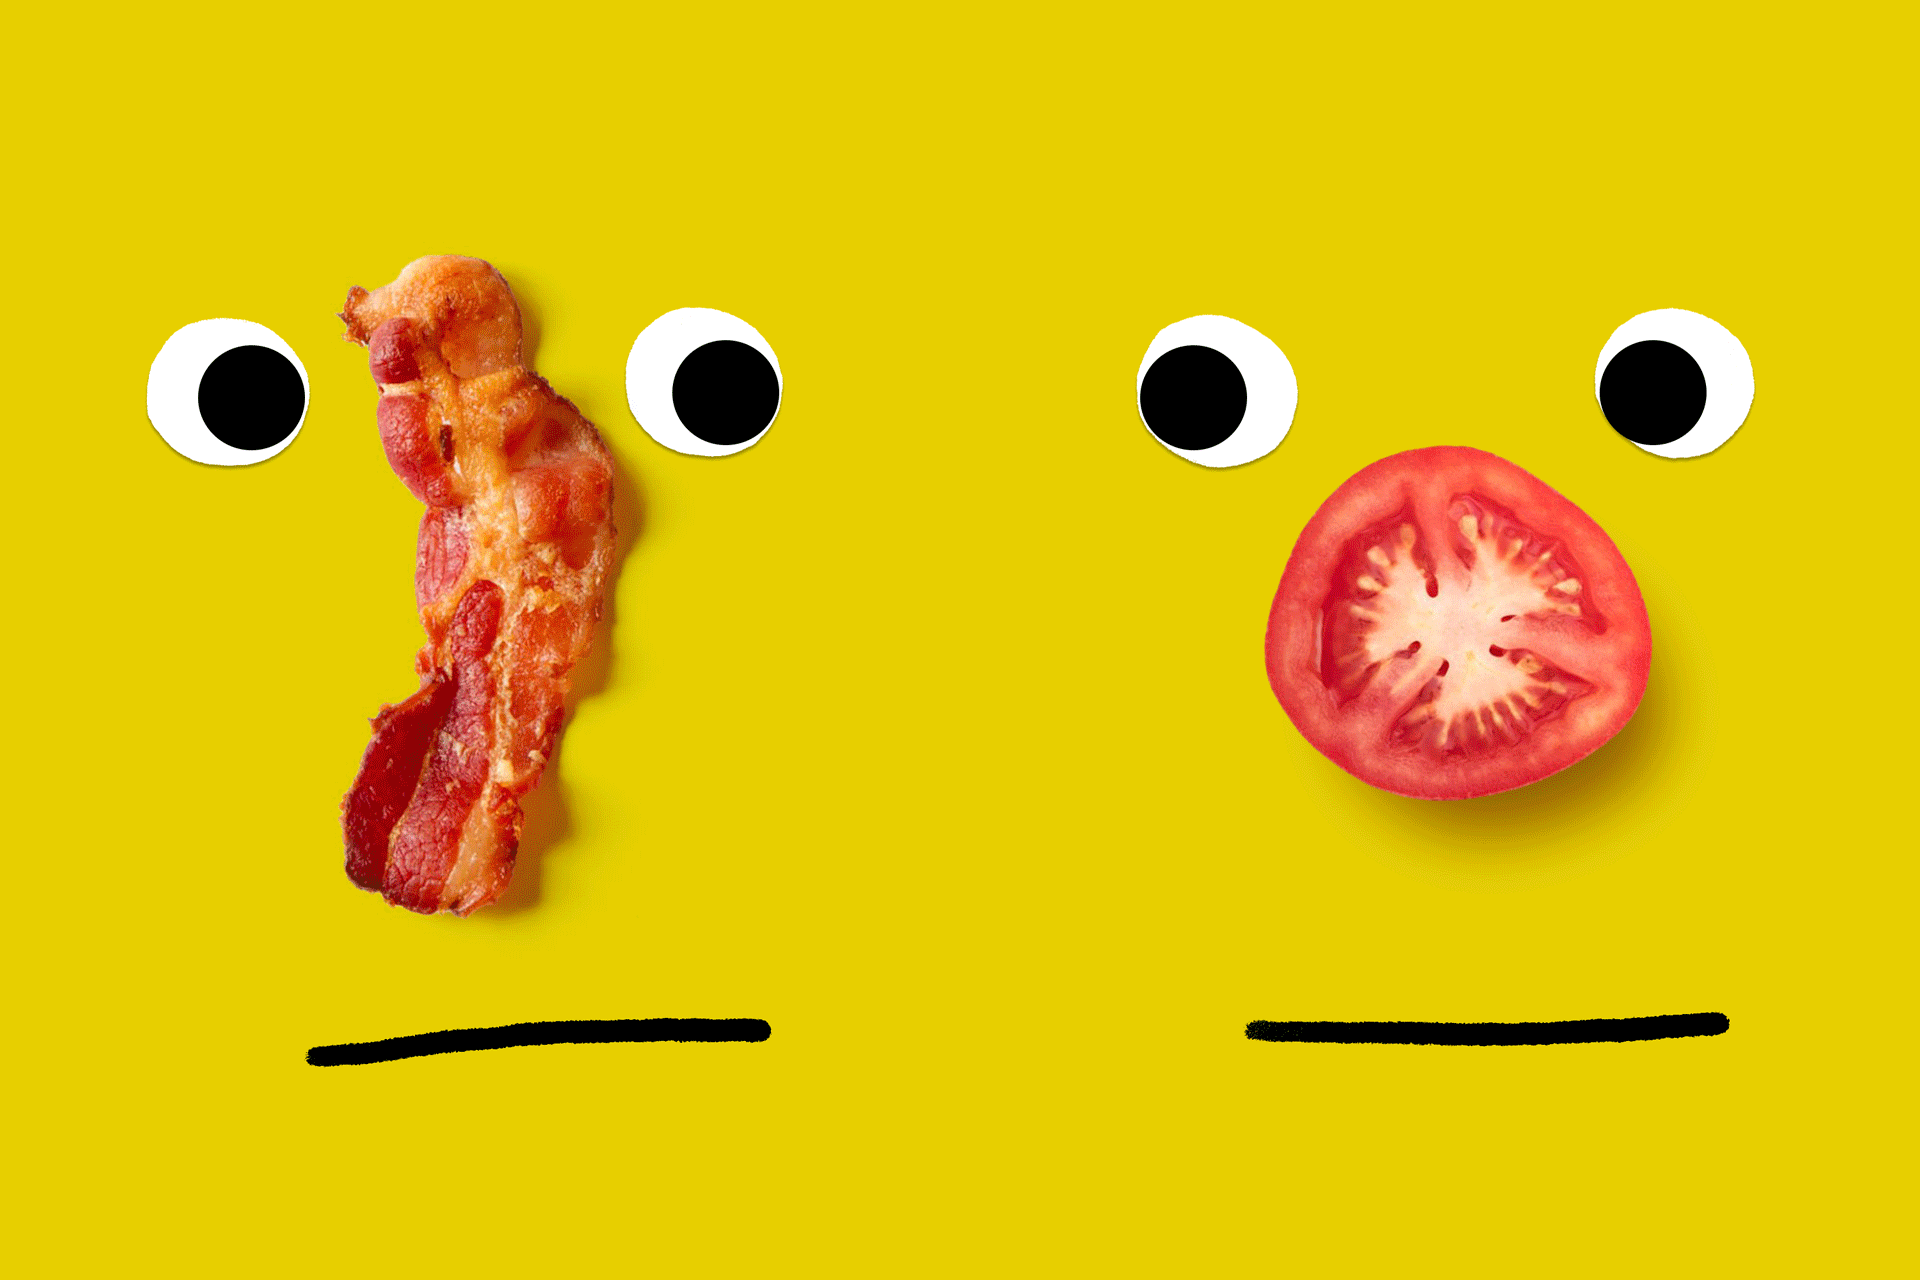 Do vegetarians smell different than meat-eaters? A strange encounter led me to find out